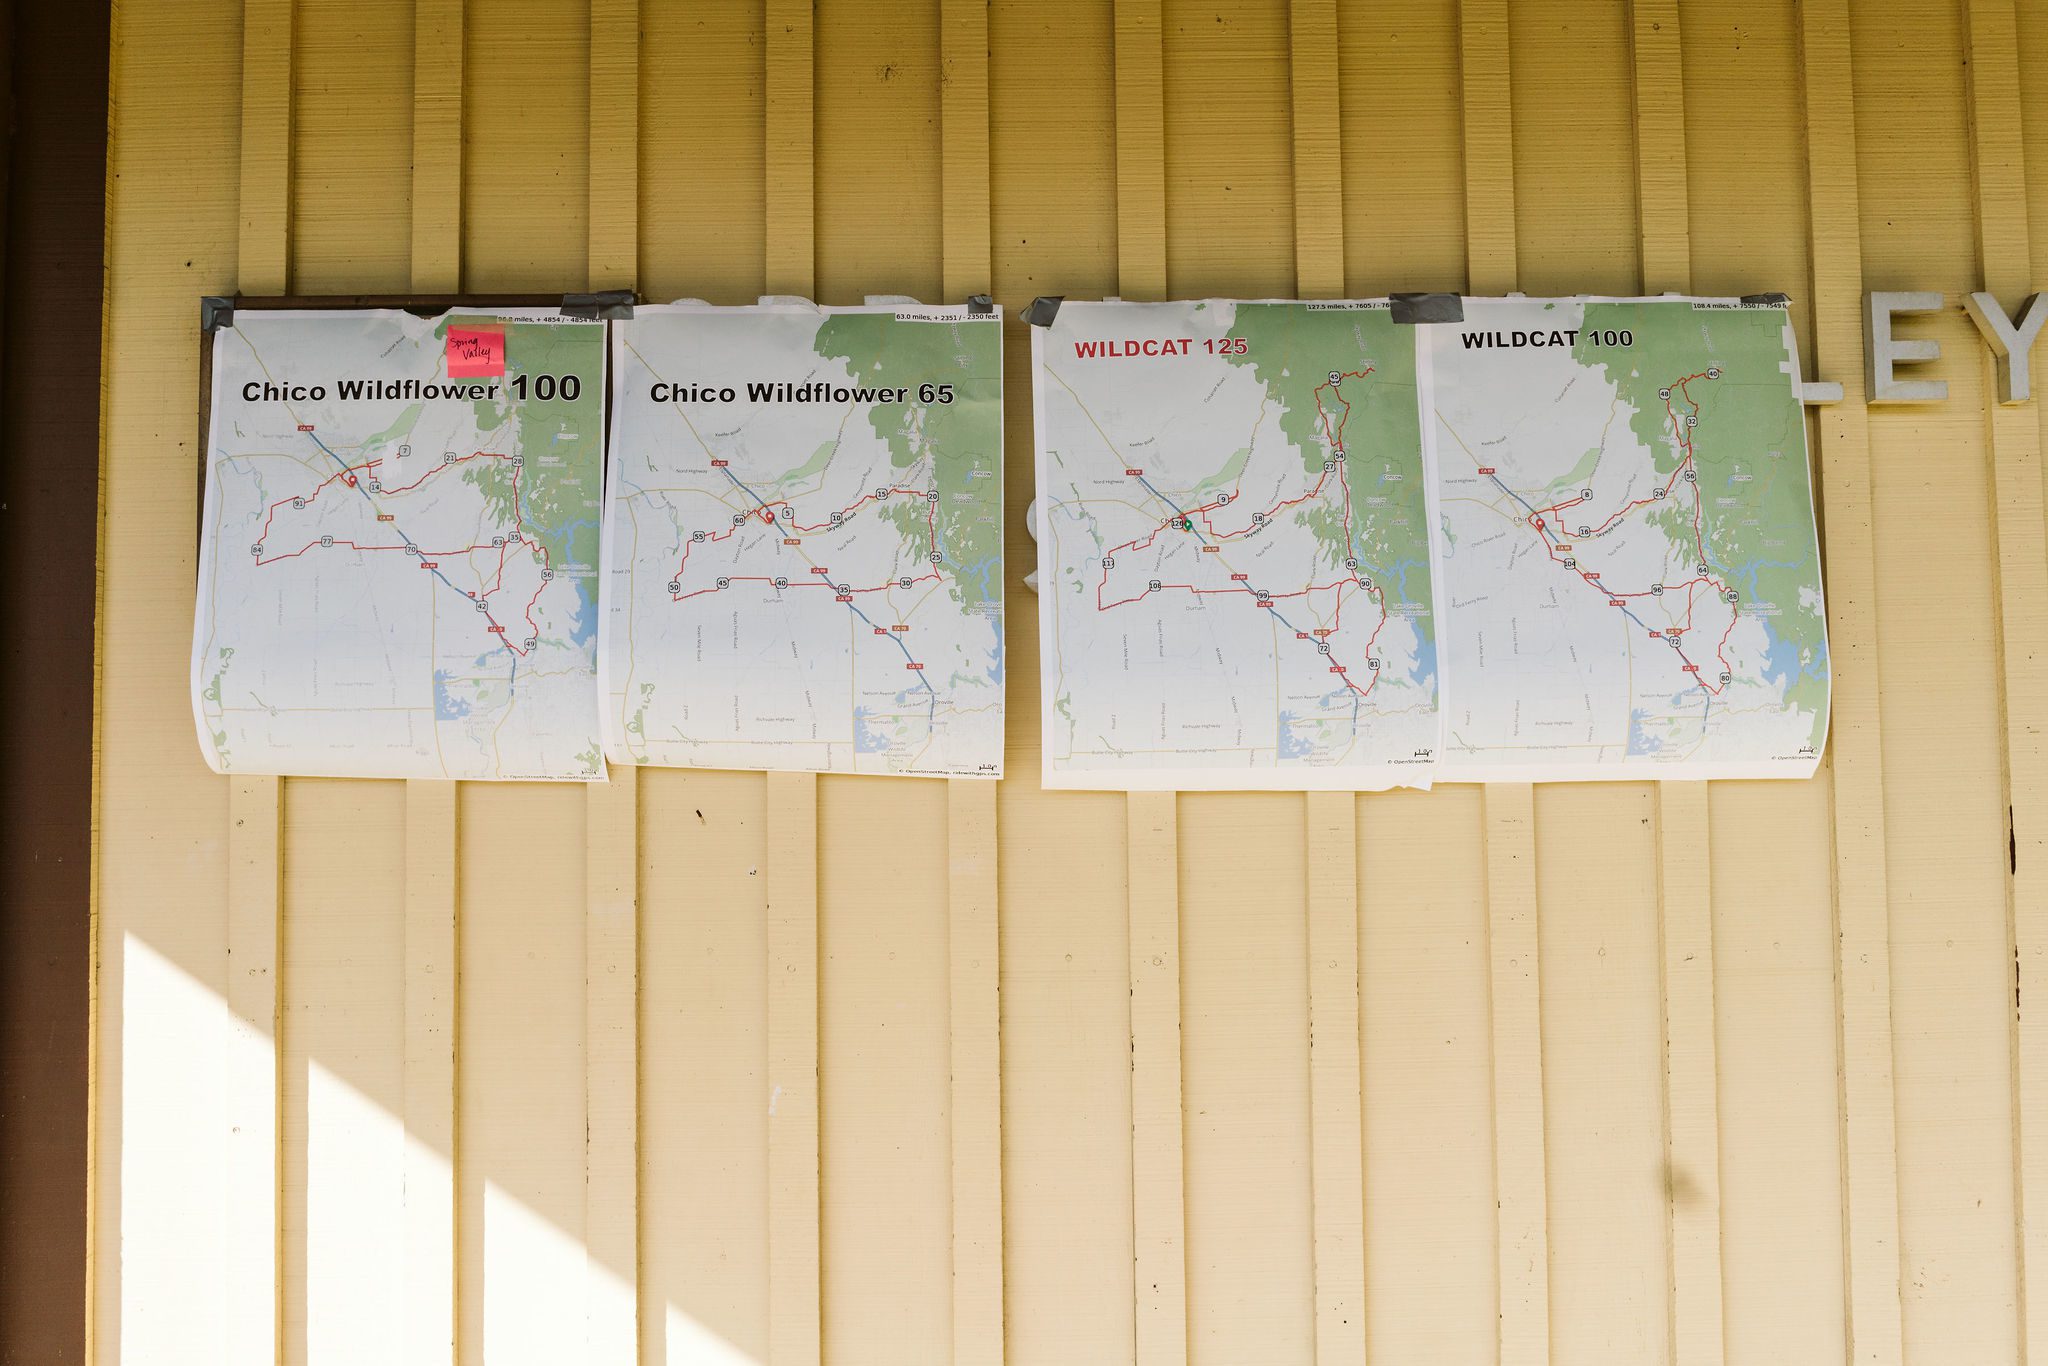 Maps showing different Chico Wildflower cycling routes